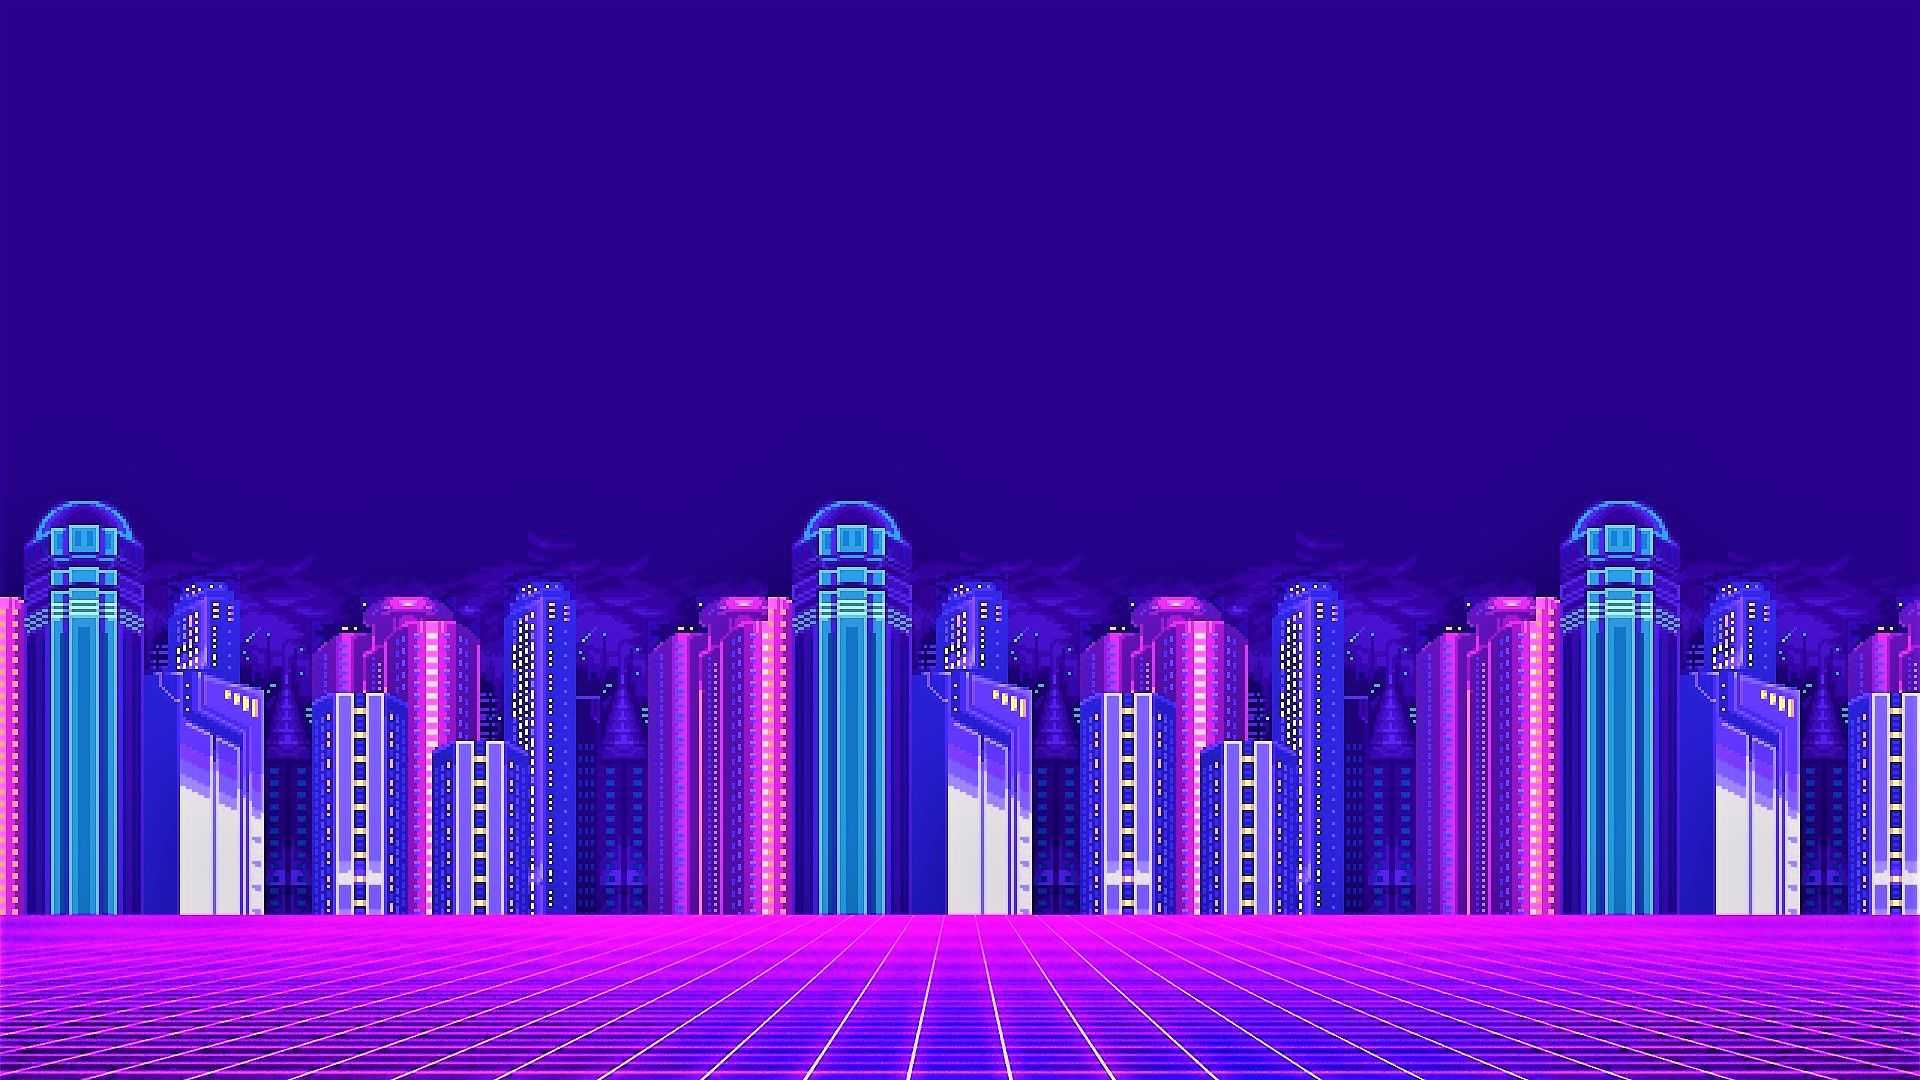 The city of future in neon colors - Vaporwave